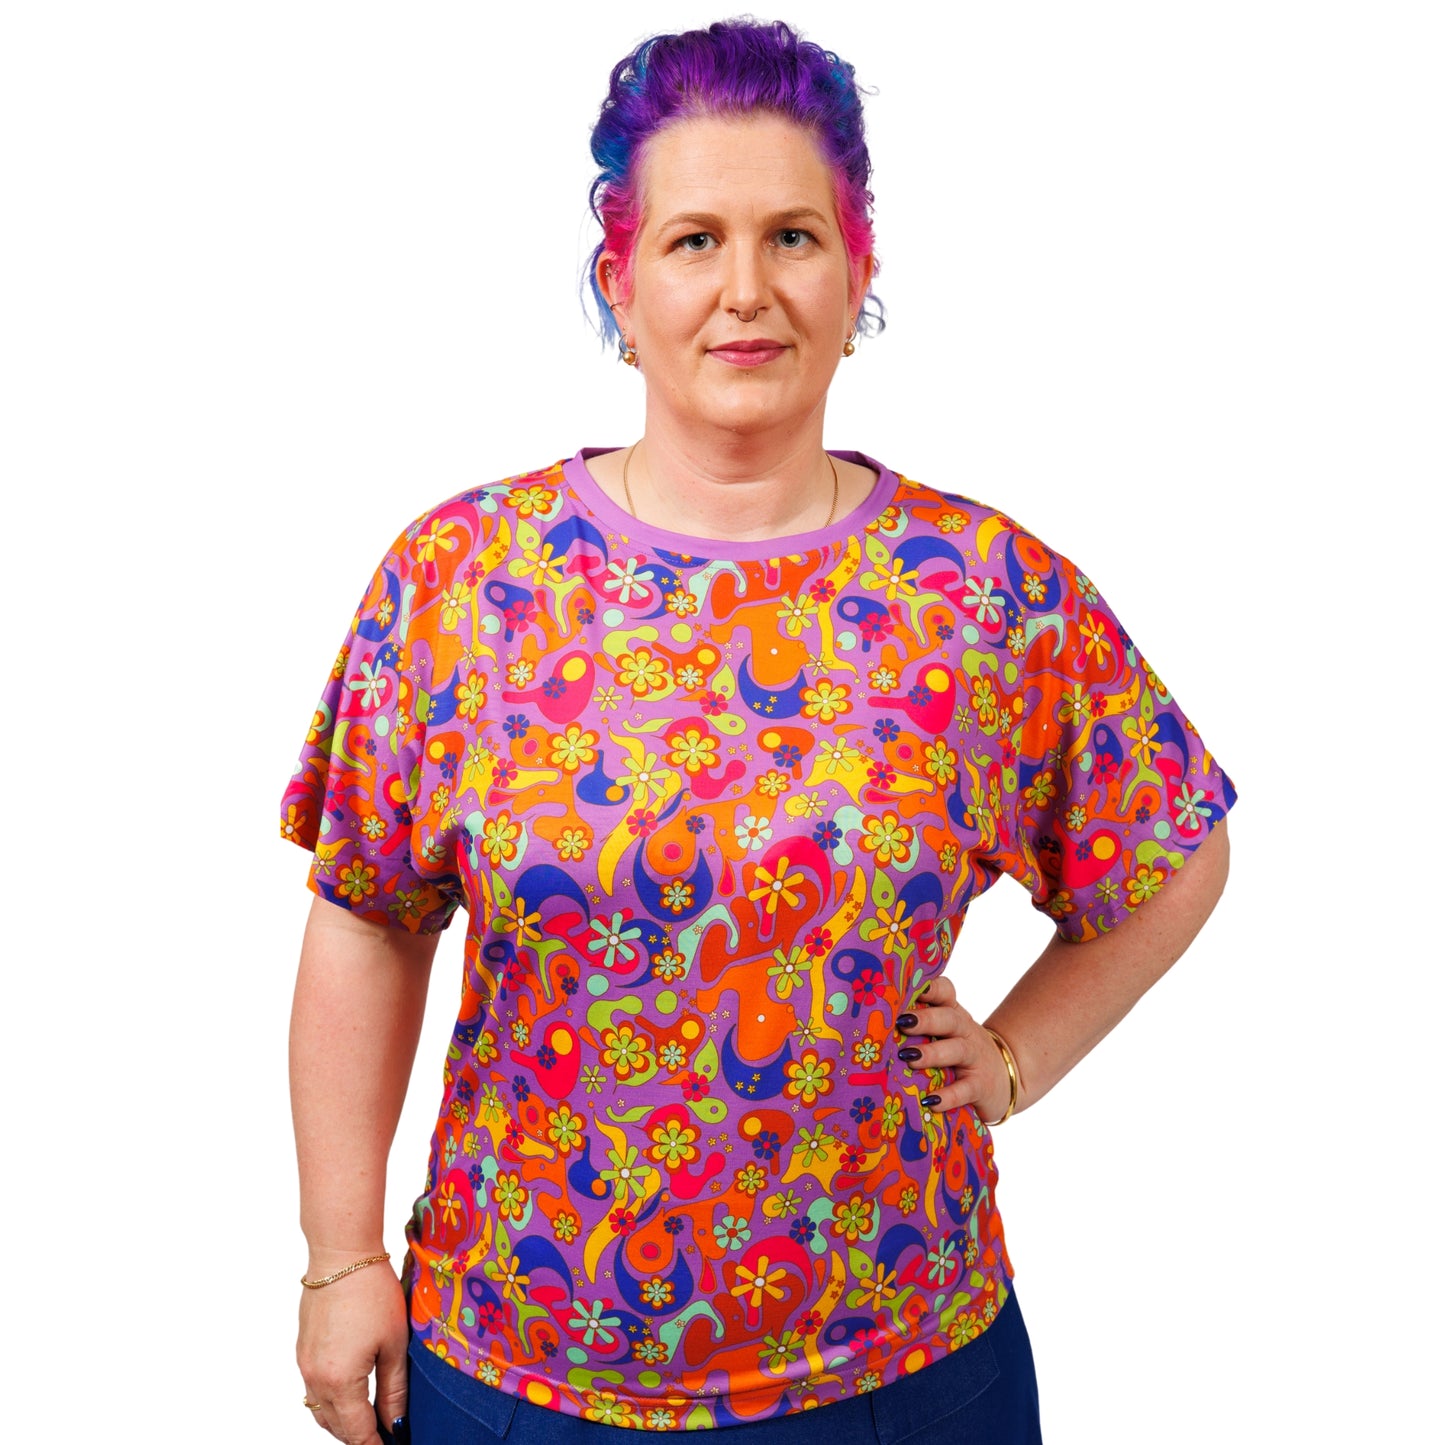 Flower Power Batwing Top by RainbowsAndFairies.com.au (Floral Print - Woodstock - Psychedelic Print - Knit Top - Kitsch - Vintage Inspired - Retro Top) - SKU: CL_BATOP_FLOPO_ORG - Pic-04